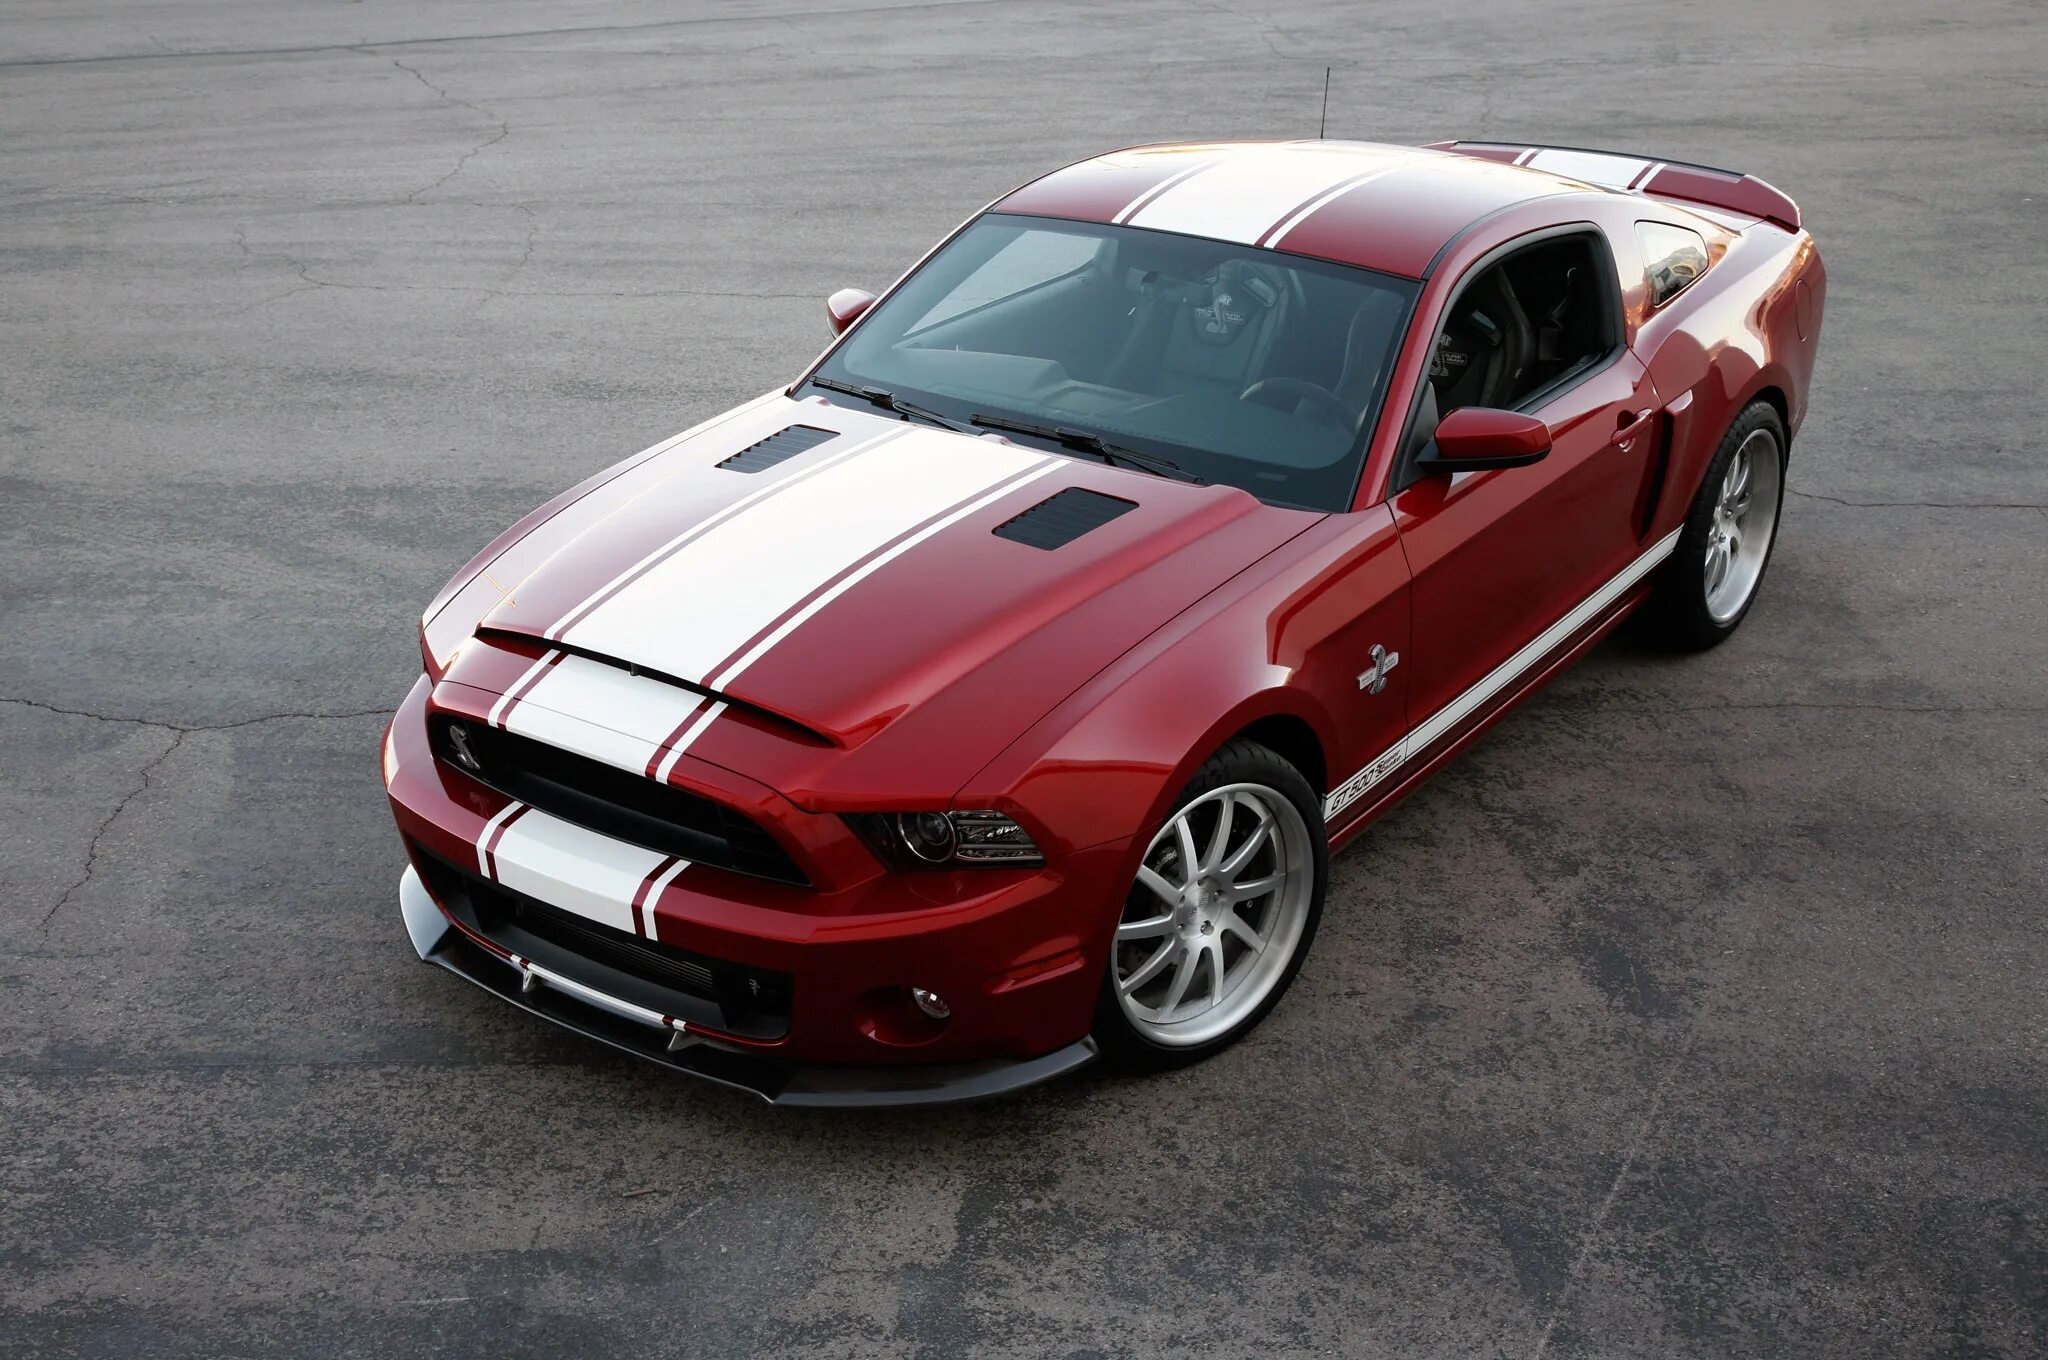 Mustang shelby gt. Ford Shelby gt500. Форд Мустанг Шелби 500. Форд Мустанг gt 500. Форд Мустанг Шелби gt500cr.